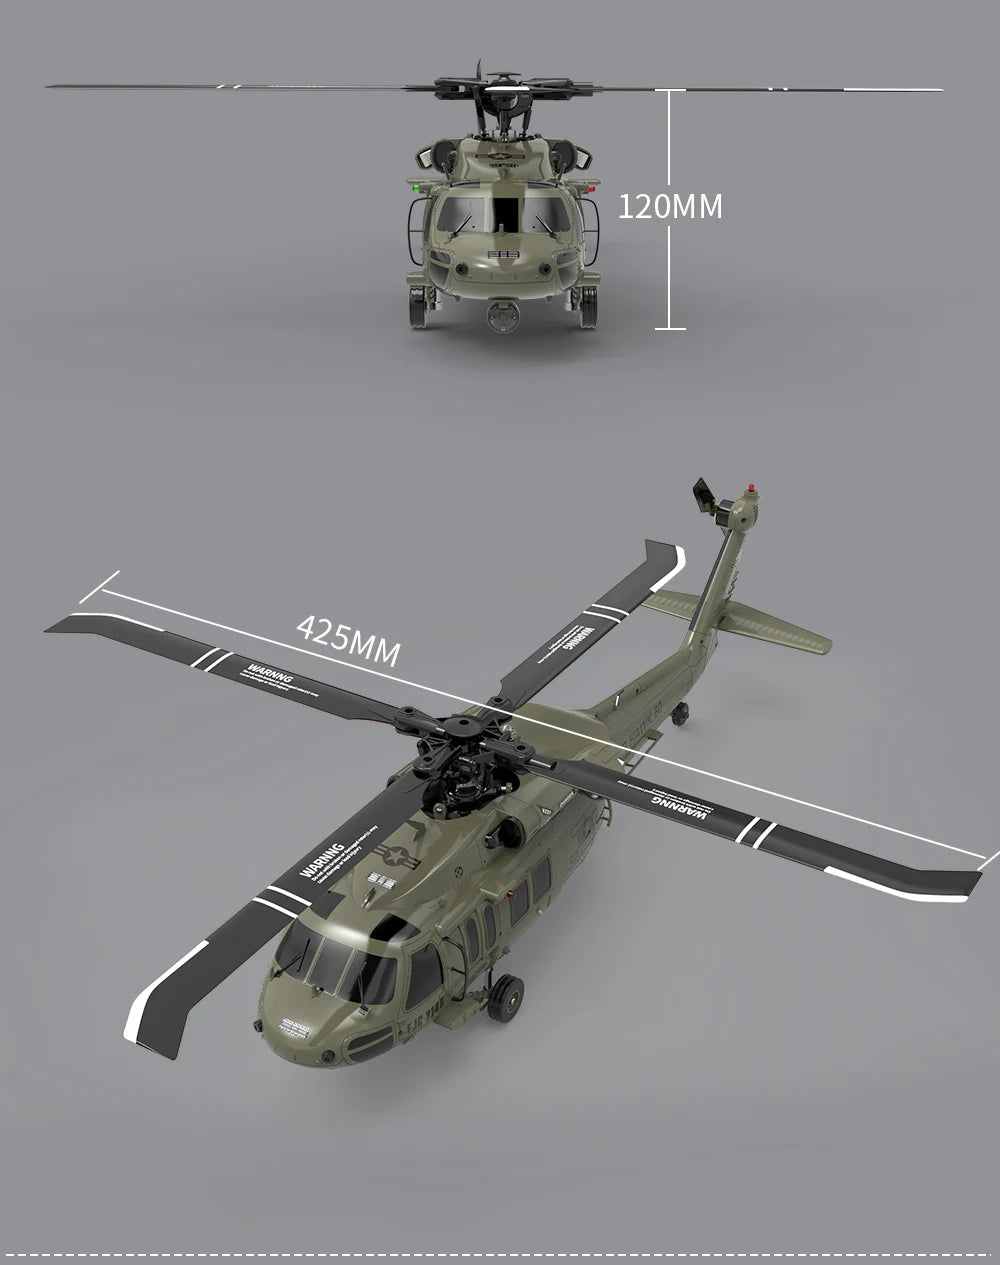 YXZNRC F09 RC Helicopter, it has high efficiency, power saving and long flight time